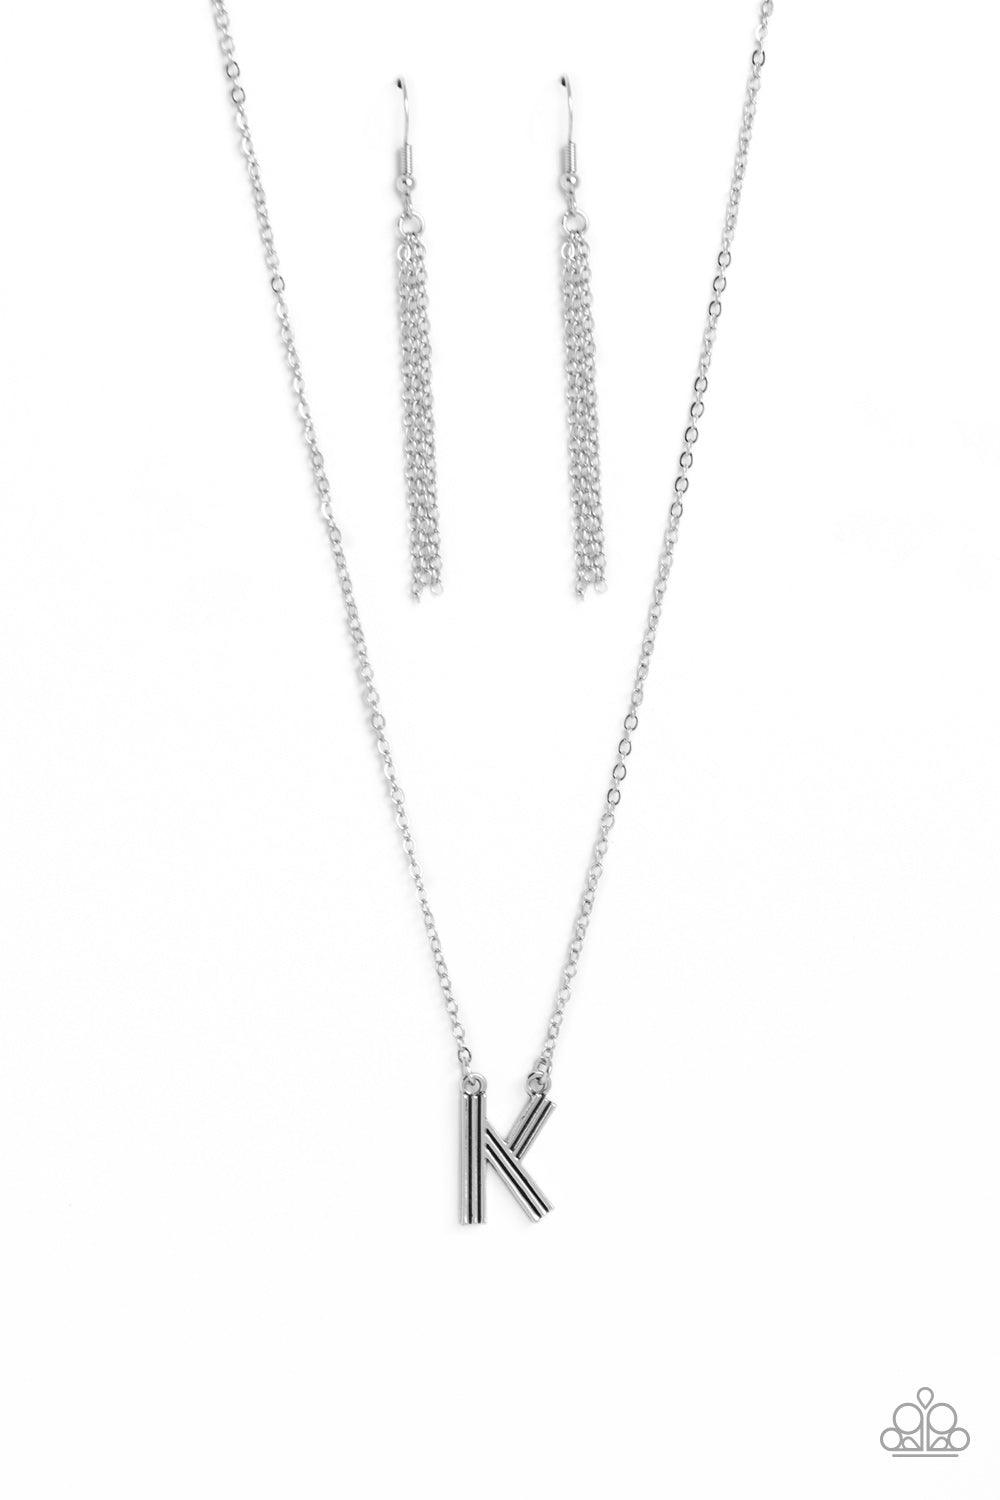 Paparazzi Accessories - Leave Your Initials - Silver - K Necklace - Bling by JessieK